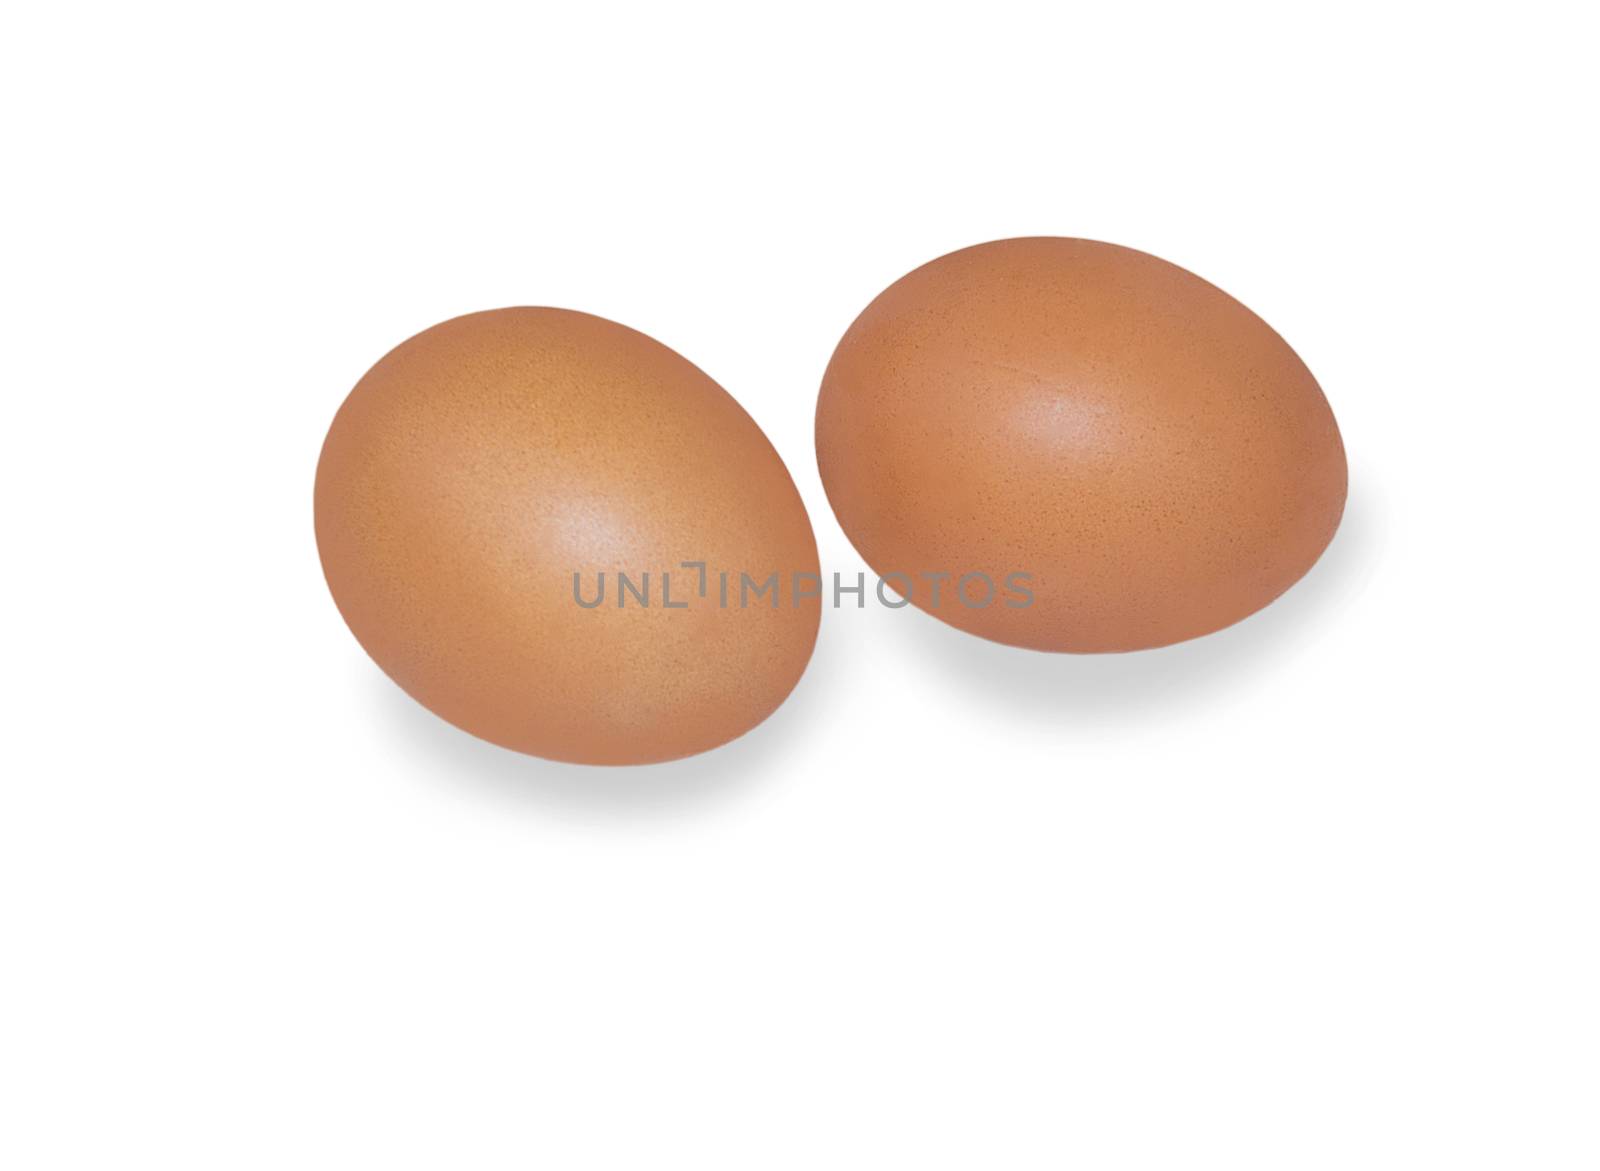 eggs. For your commercial and editorial use